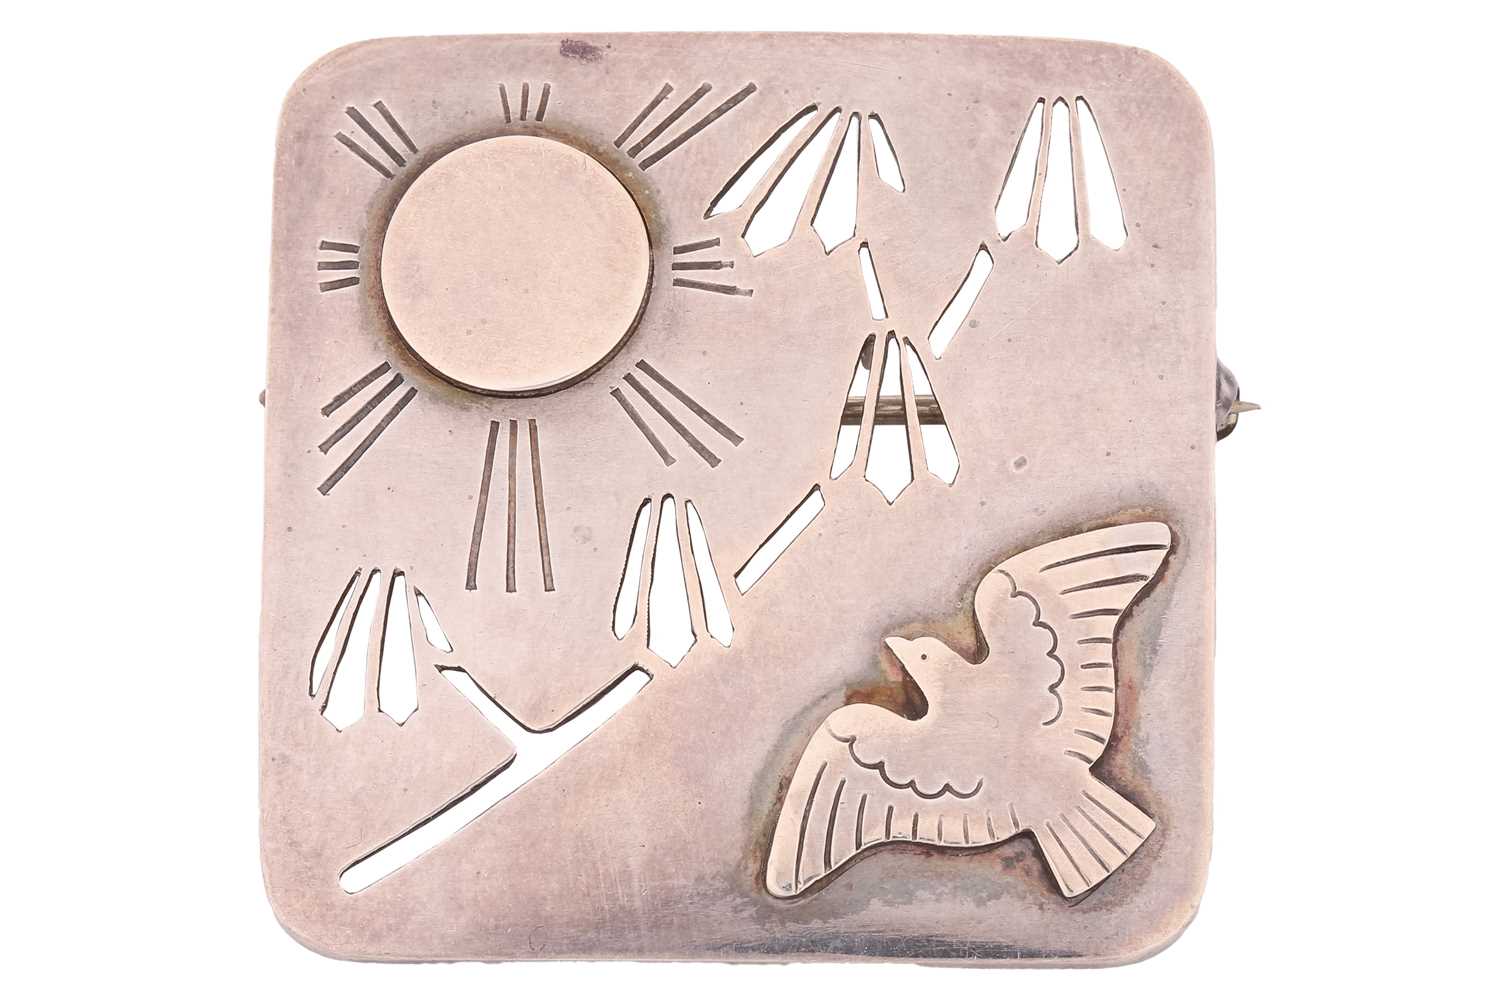 Georg Jensen - a square brooch with rounded corners, decorated in cut card relief with a bird and